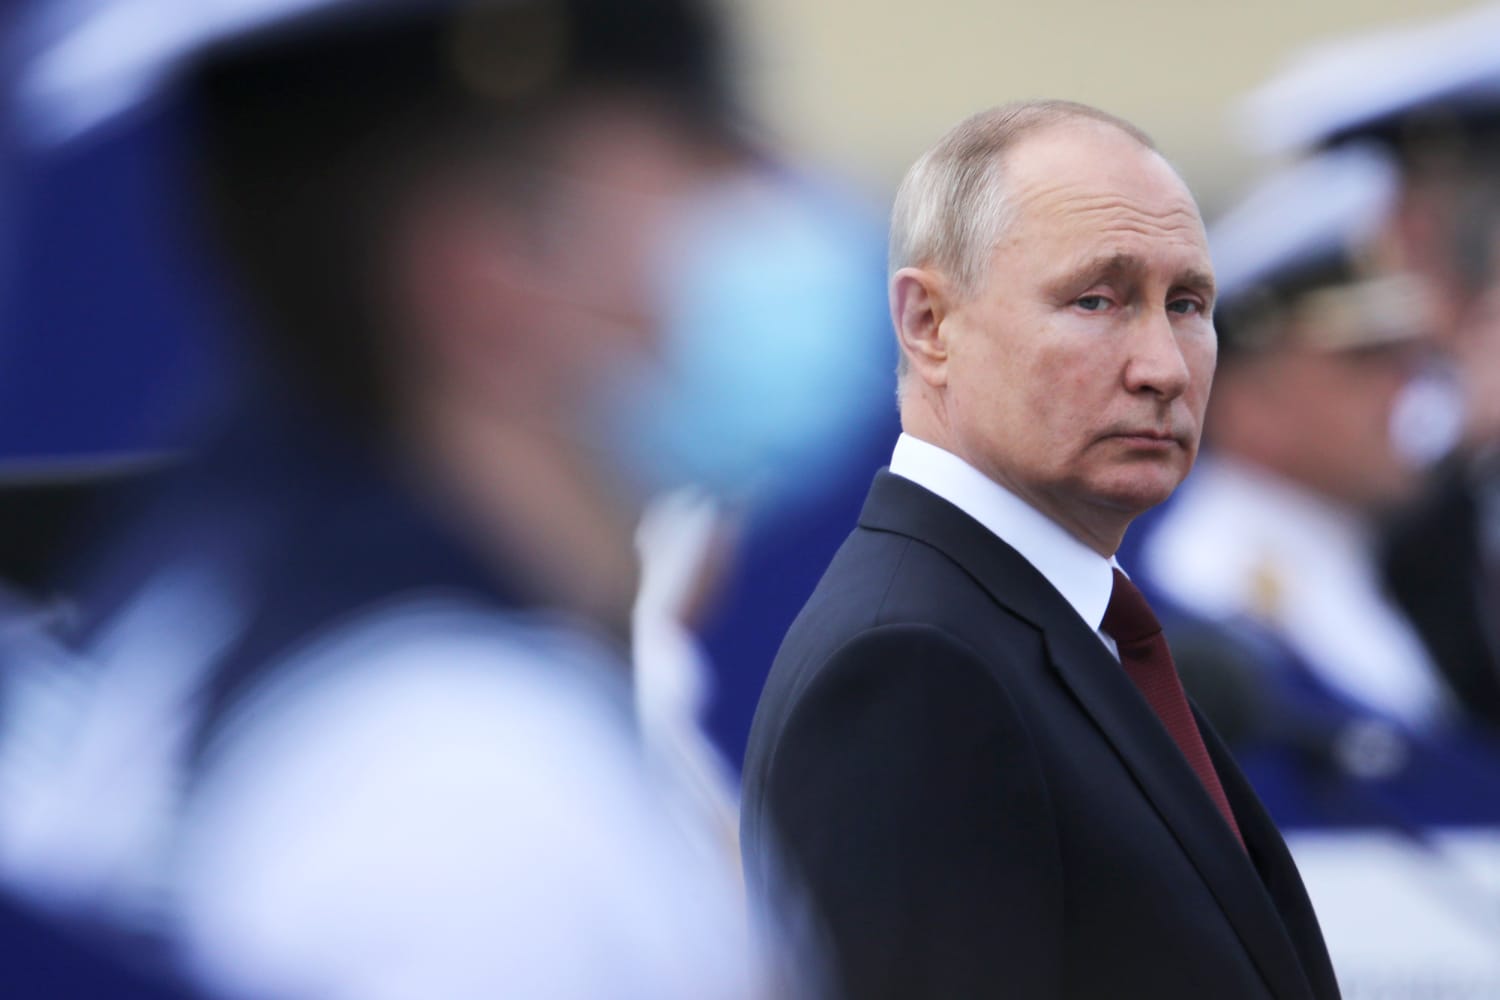 World faces most dangerous decade since WWII, Putin says as he blasts West for ‘dirty’ game